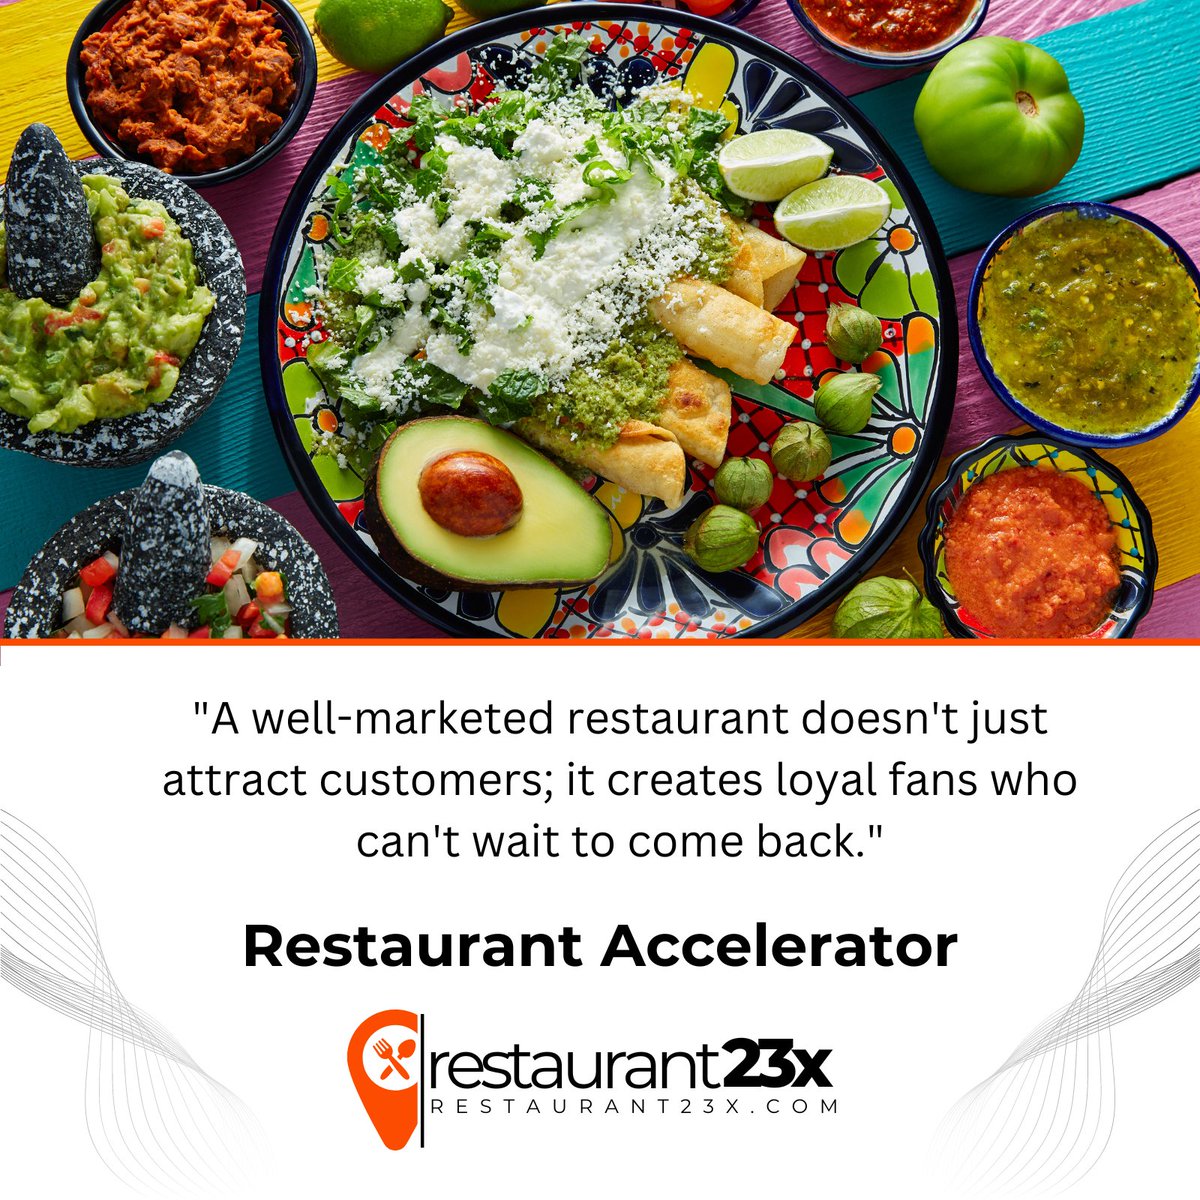 'Attracting customers is just the beginning; Restaurant23x helps you create loyal fans who keep coming back for more! 🌟 Let's turn your restaurant into a fan favorite together. #Restaurant23x #LoyalFans #GrowYourBusiness #OnlineReputation #CulinaryExcellence'